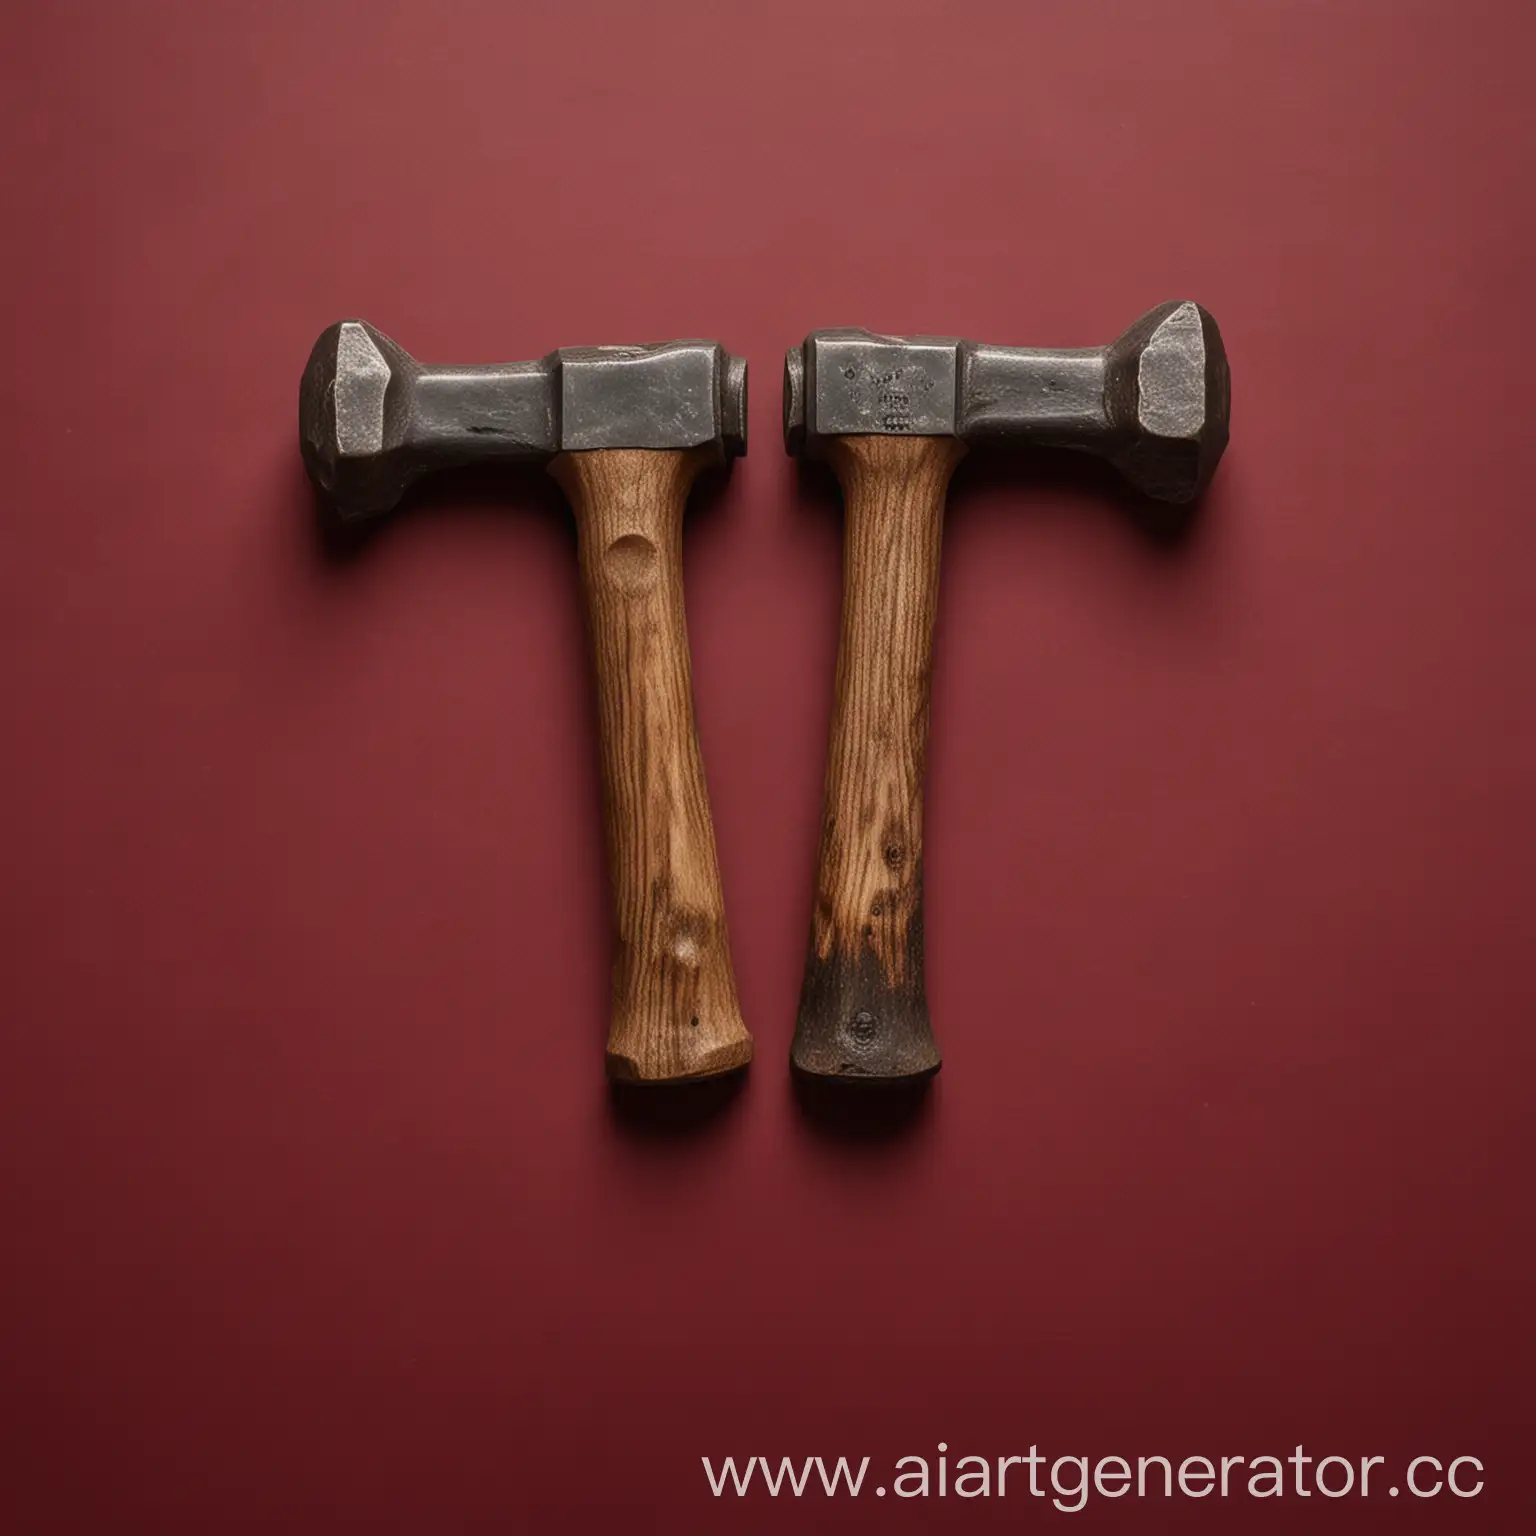 Pair-of-Hammers-on-Deep-Red-Background-Essential-Tools-for-Crafting-and-Construction